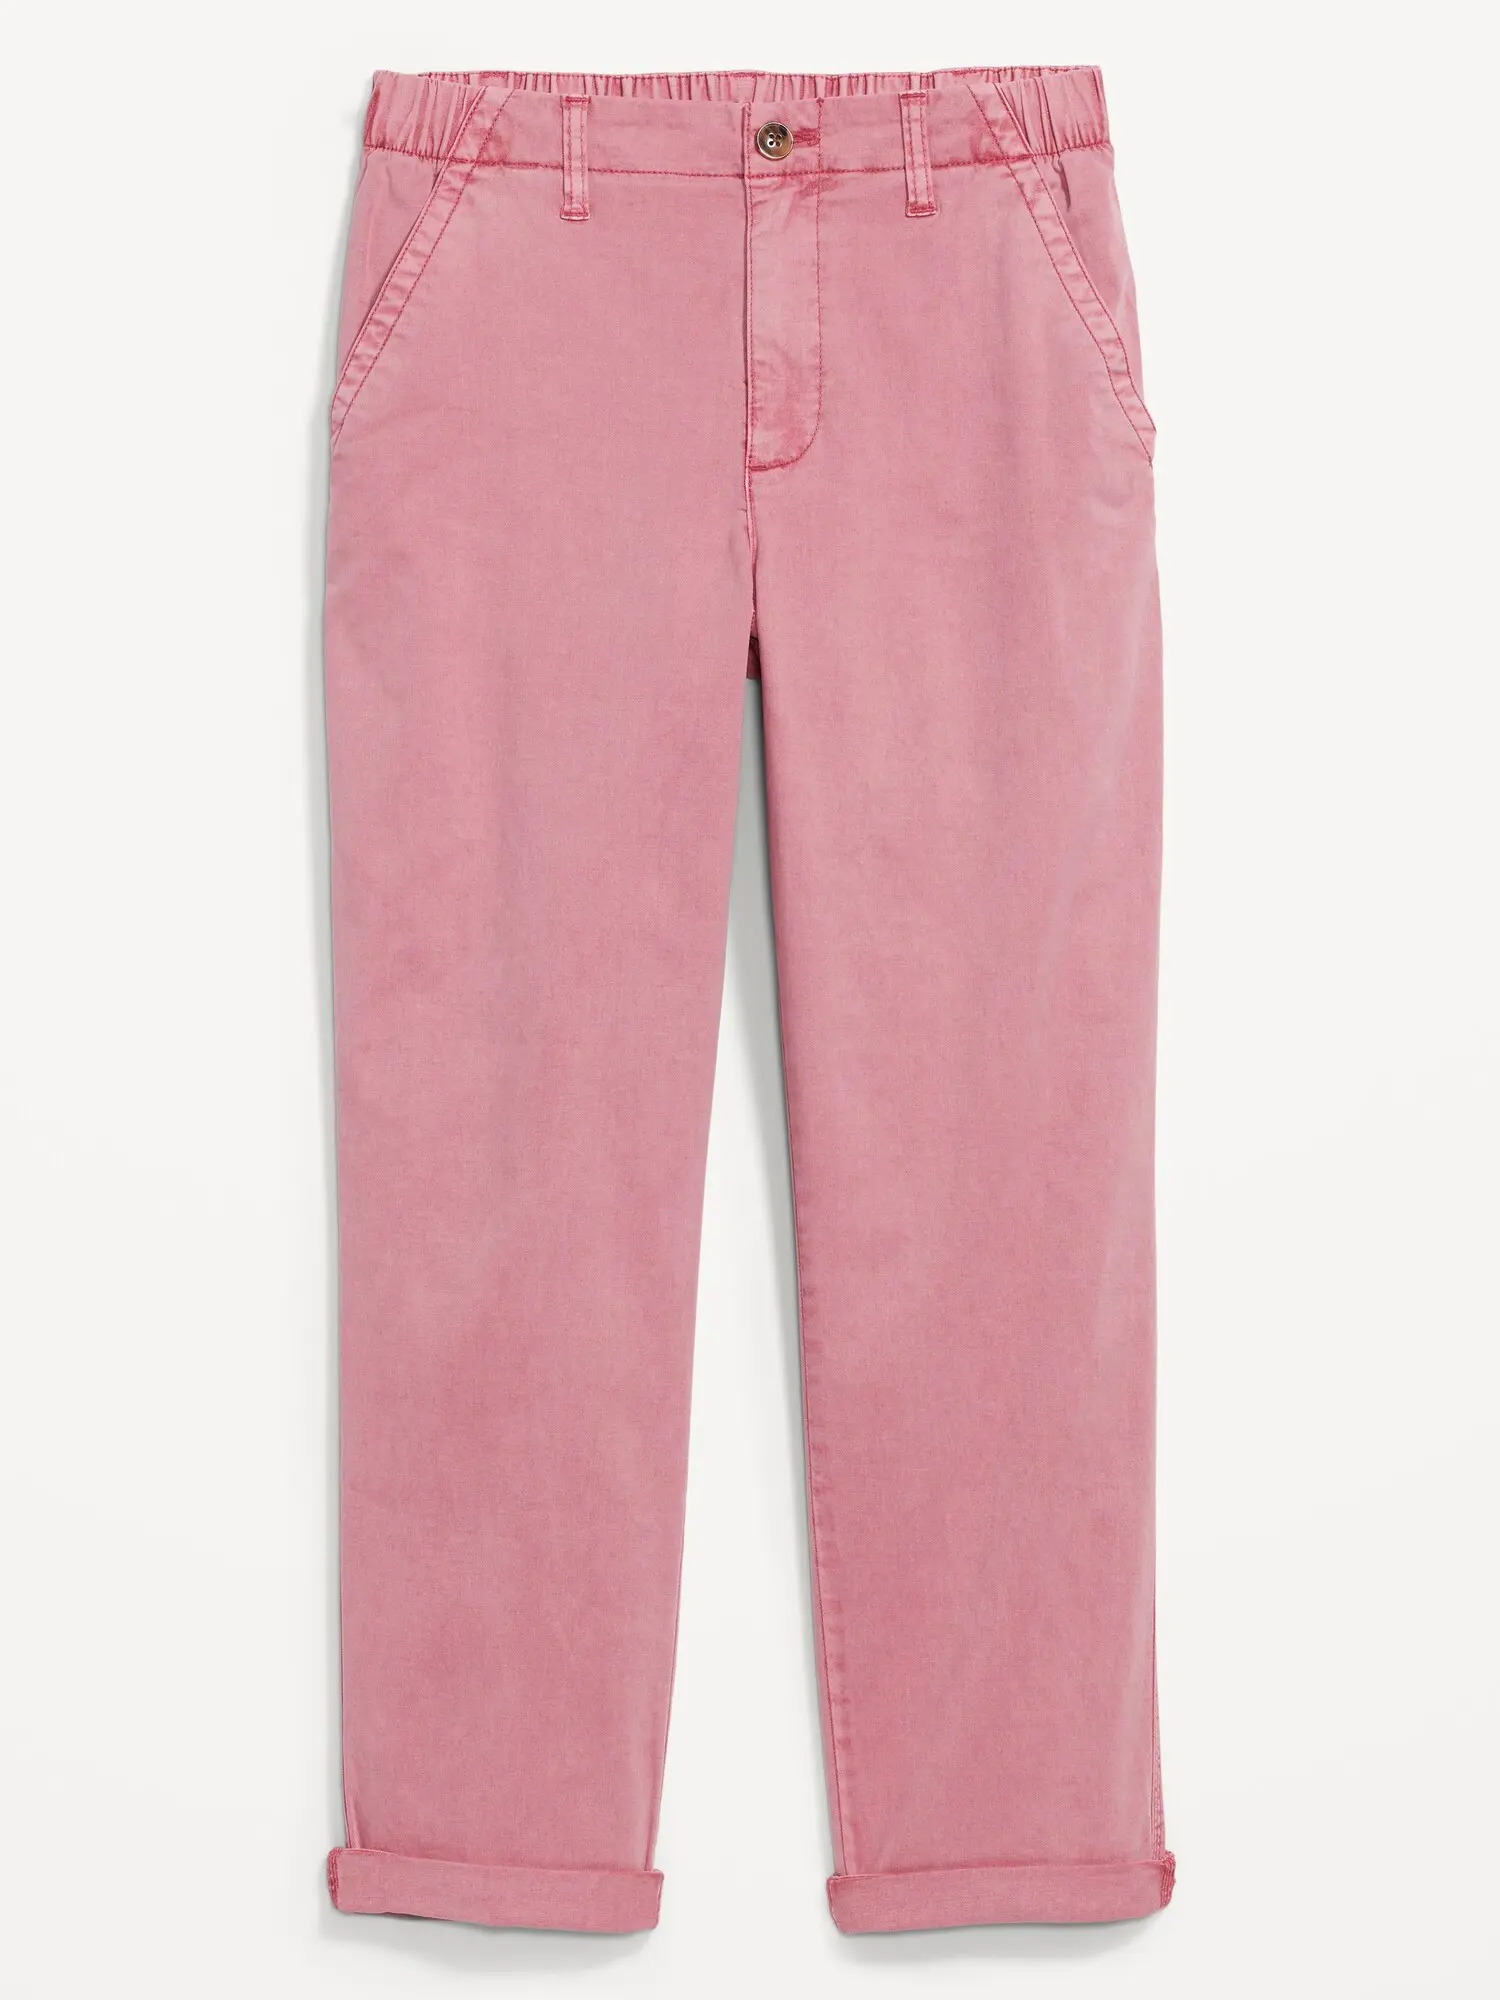 Old Navy High-Waisted OGC Chino Pants for Women pink. 1